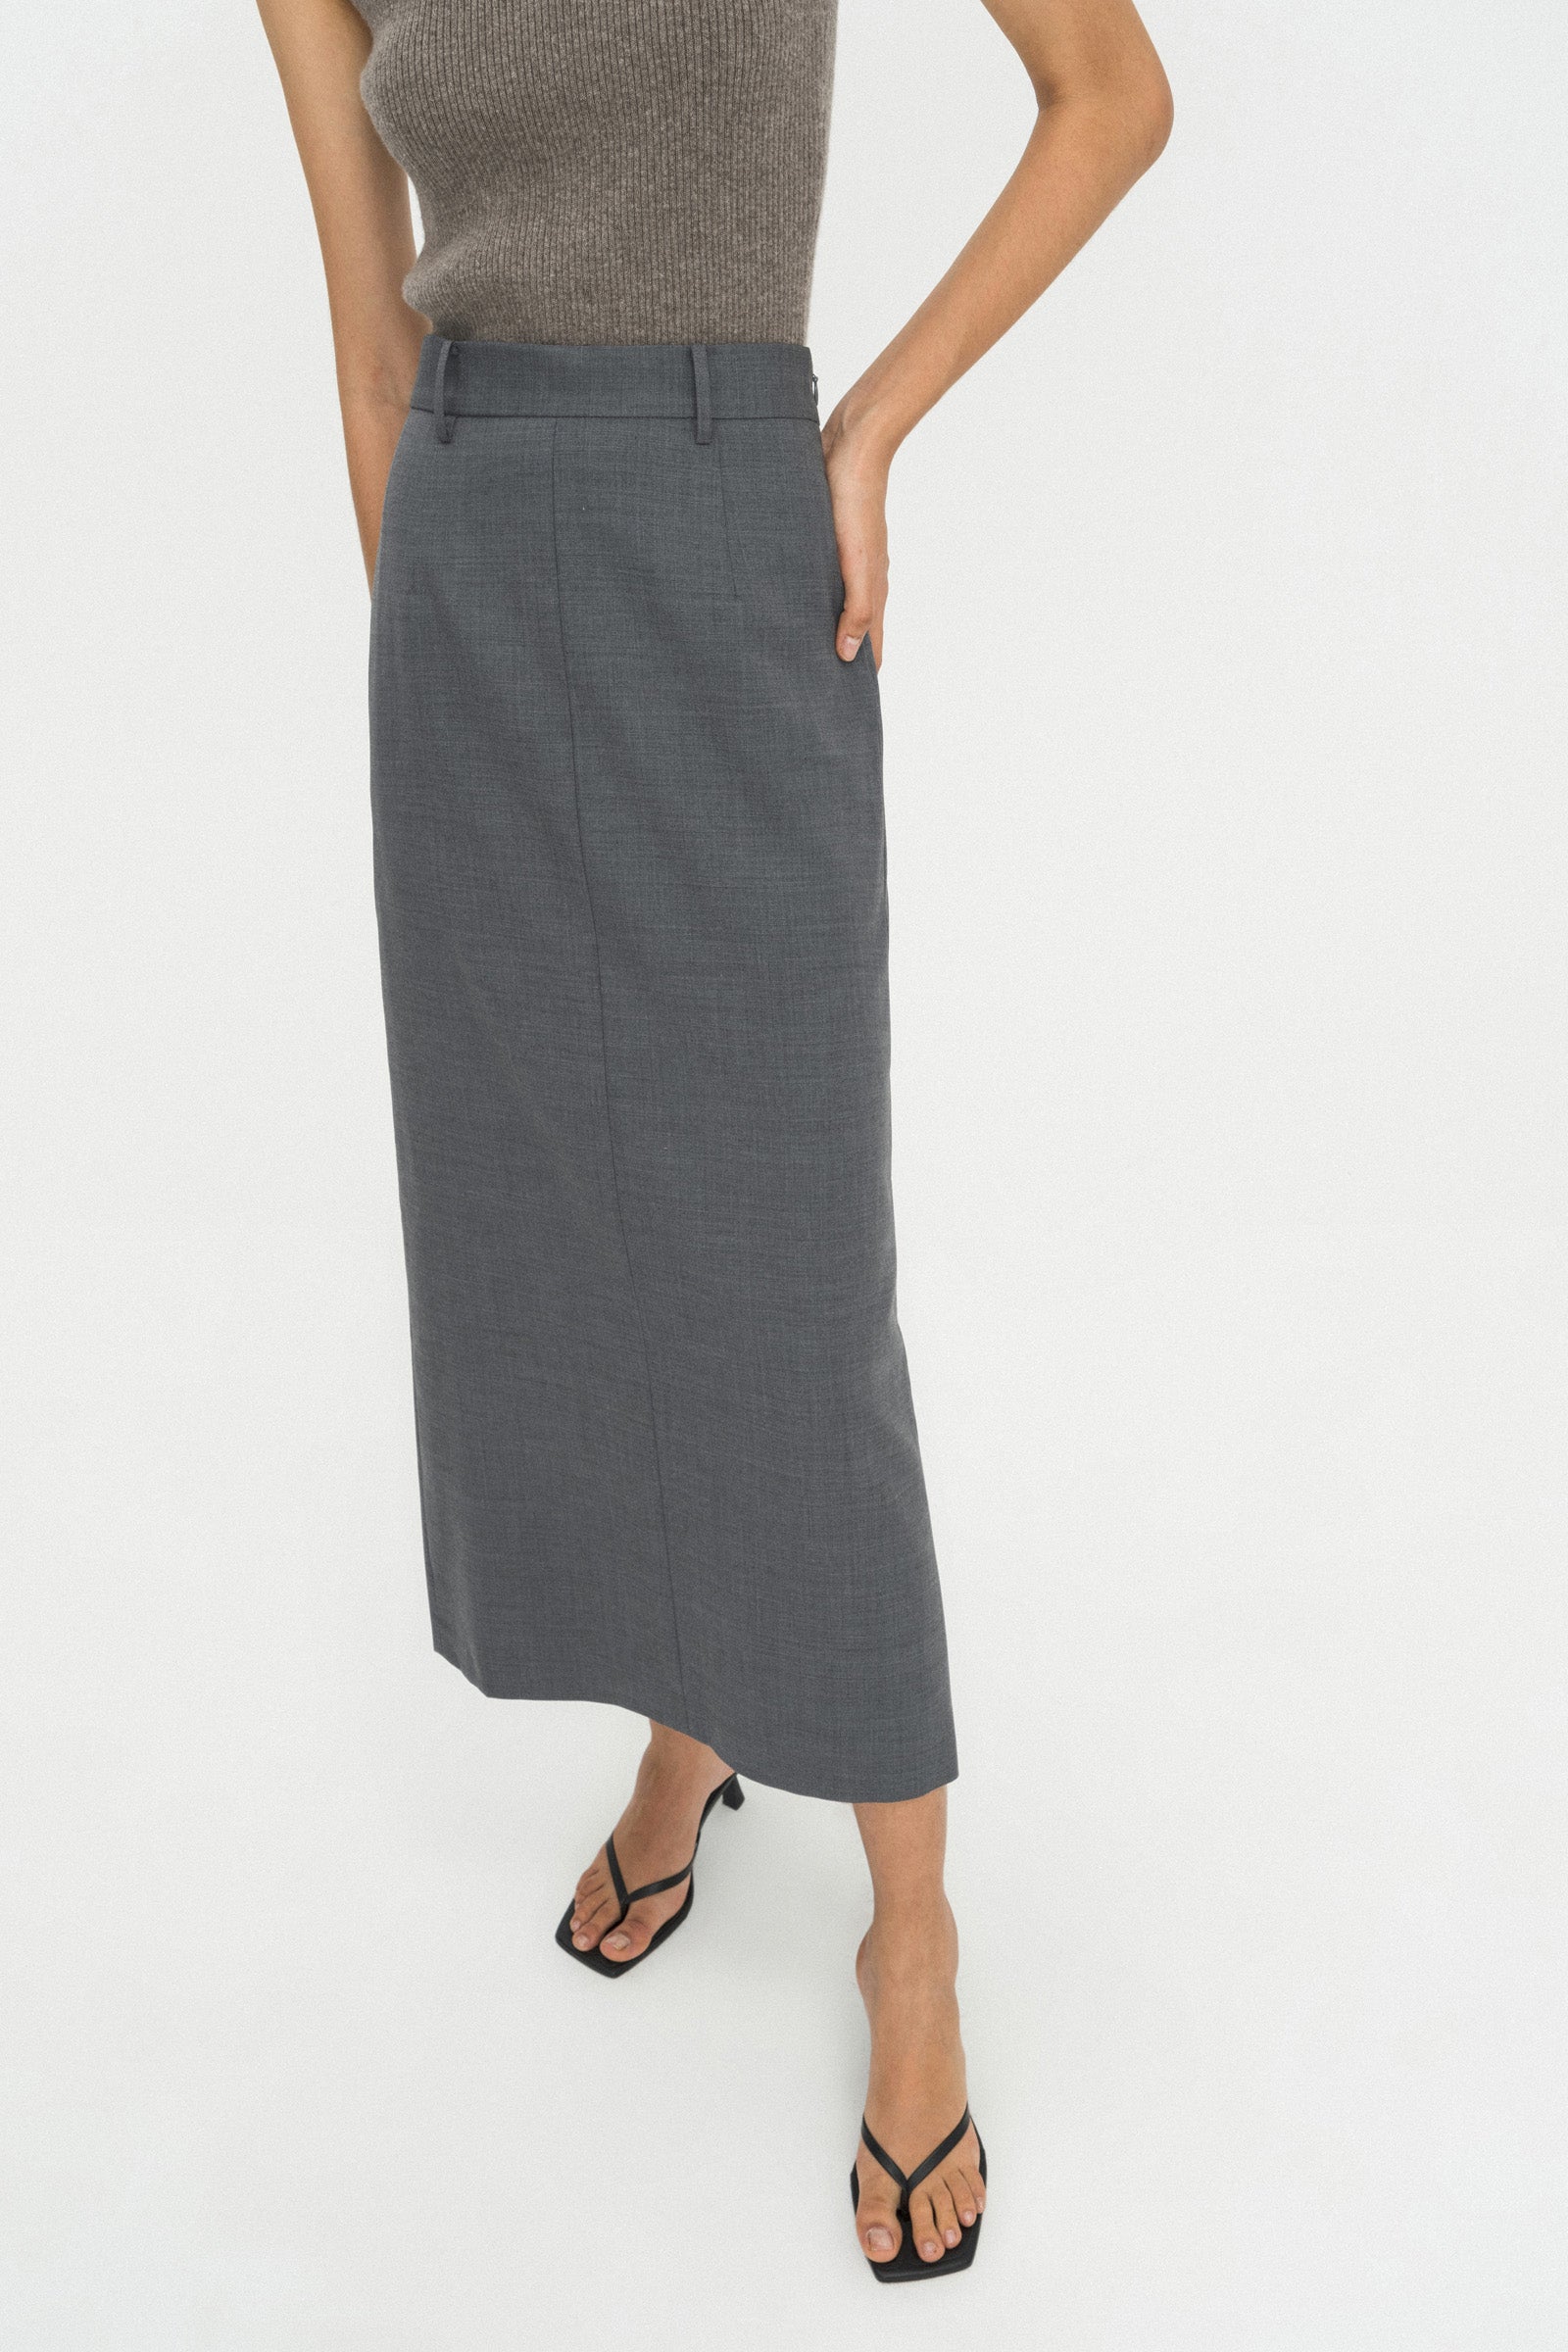 Women's Skirts | up skirts | LILY STUDIO – LILY Official Store